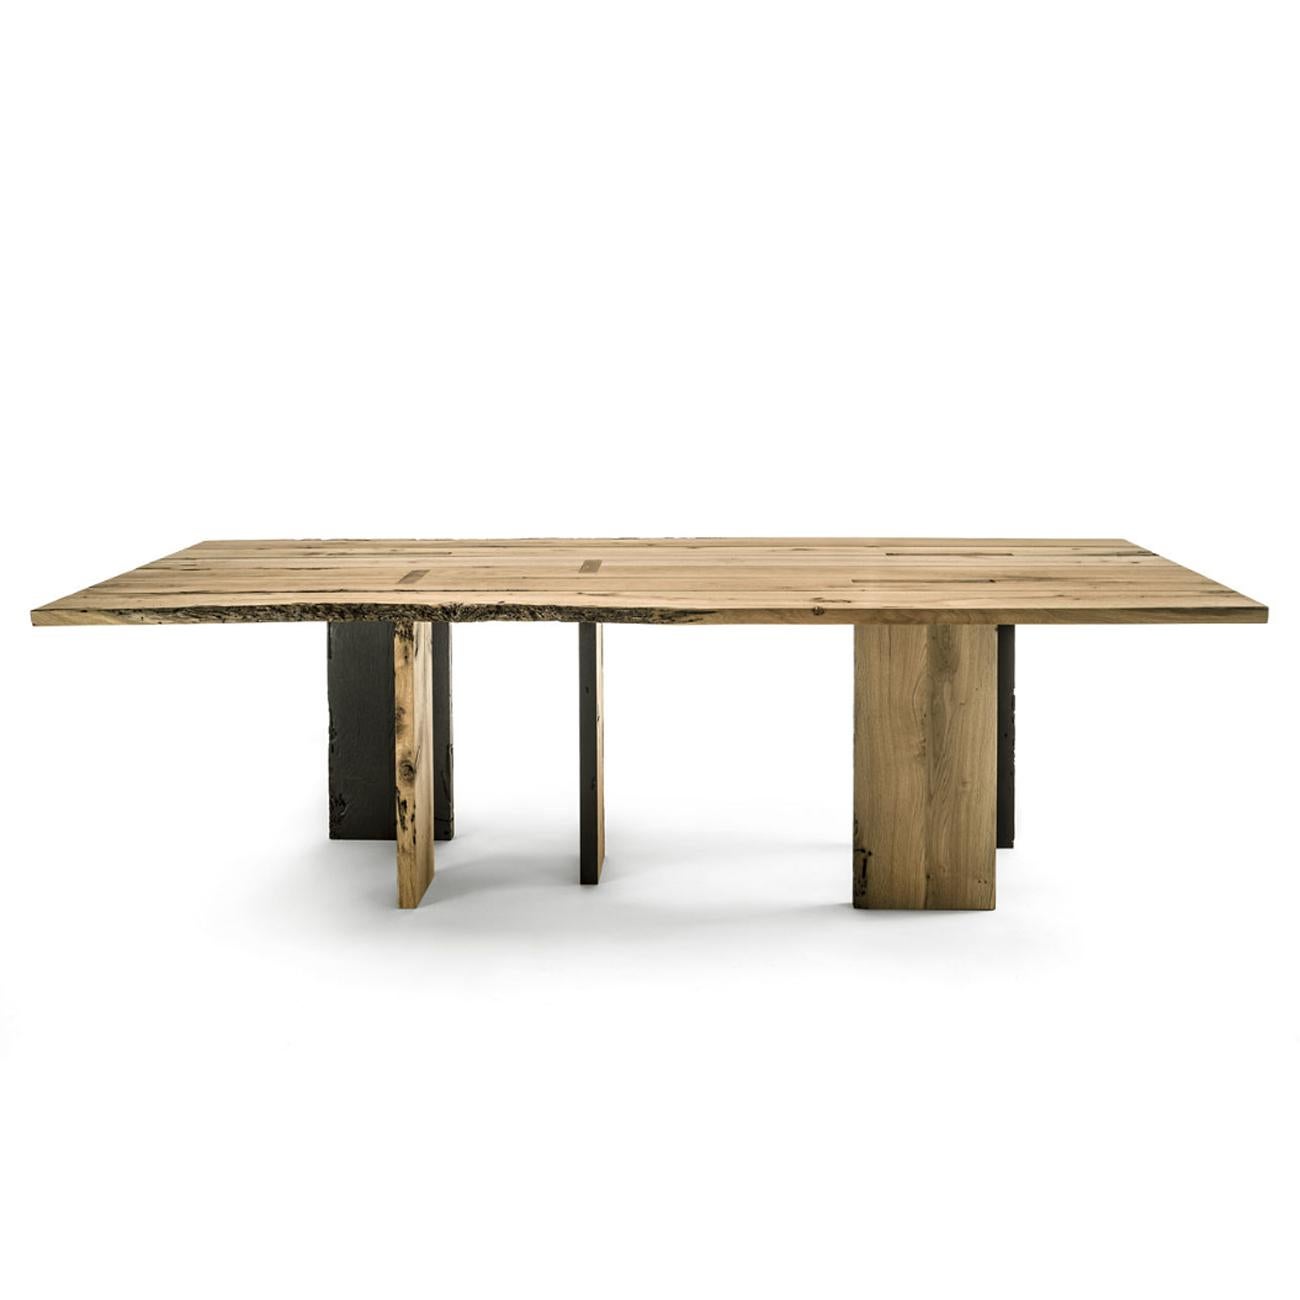 Dining table natural and burnt oak raw with
all structure in natural solid oak raw wood and
with natural burnt solid oak raw wood. With 5
strong feet with one side in burnt oak wood and
one side in natural oak wood. Treated with wax
with natural